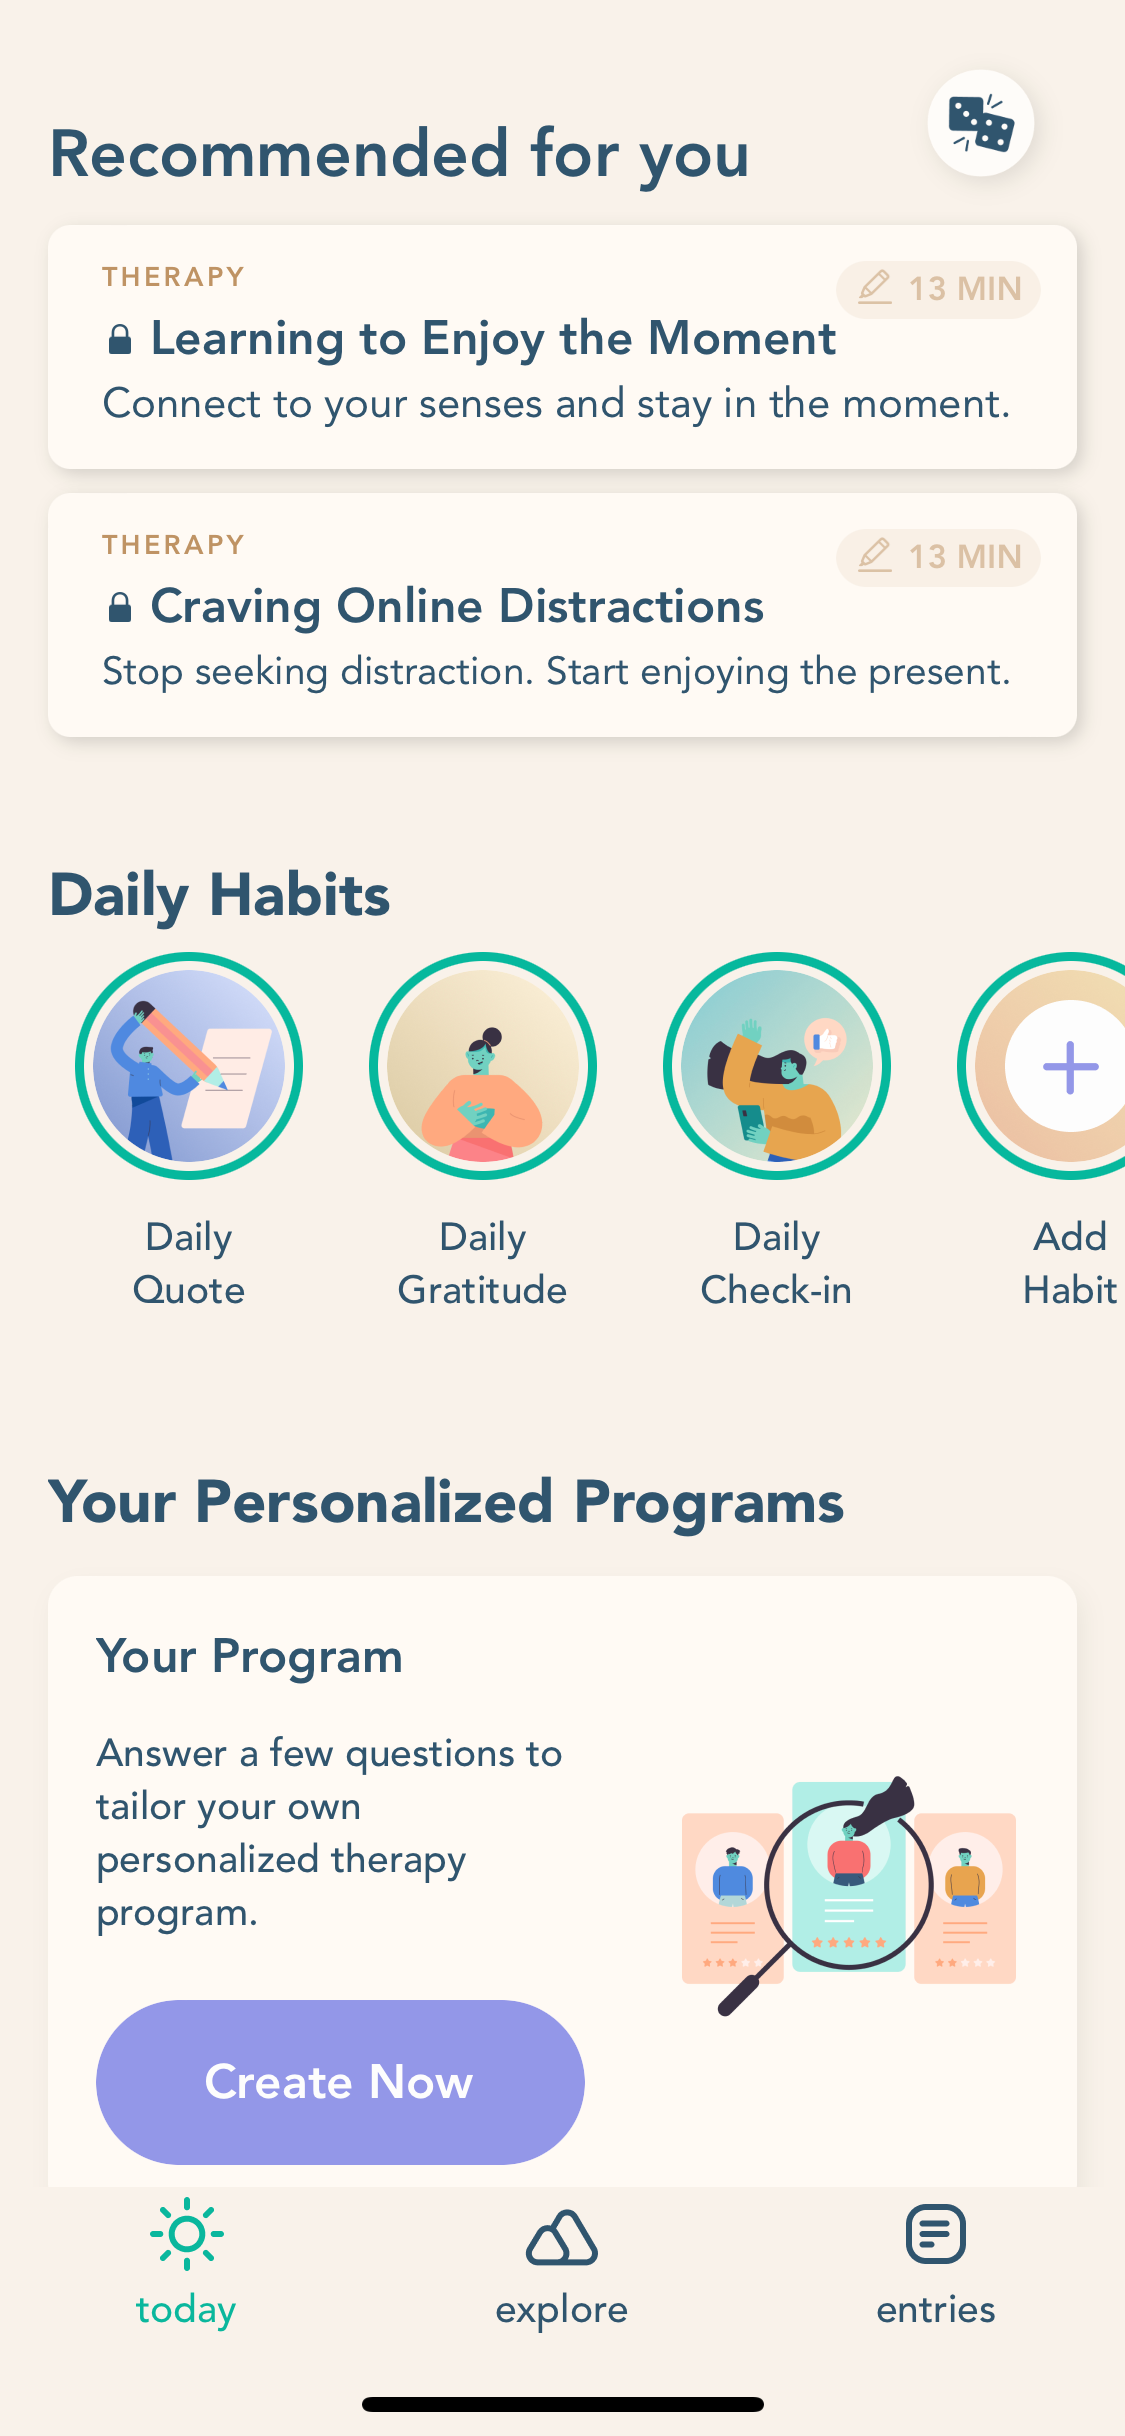 bloom daily habits